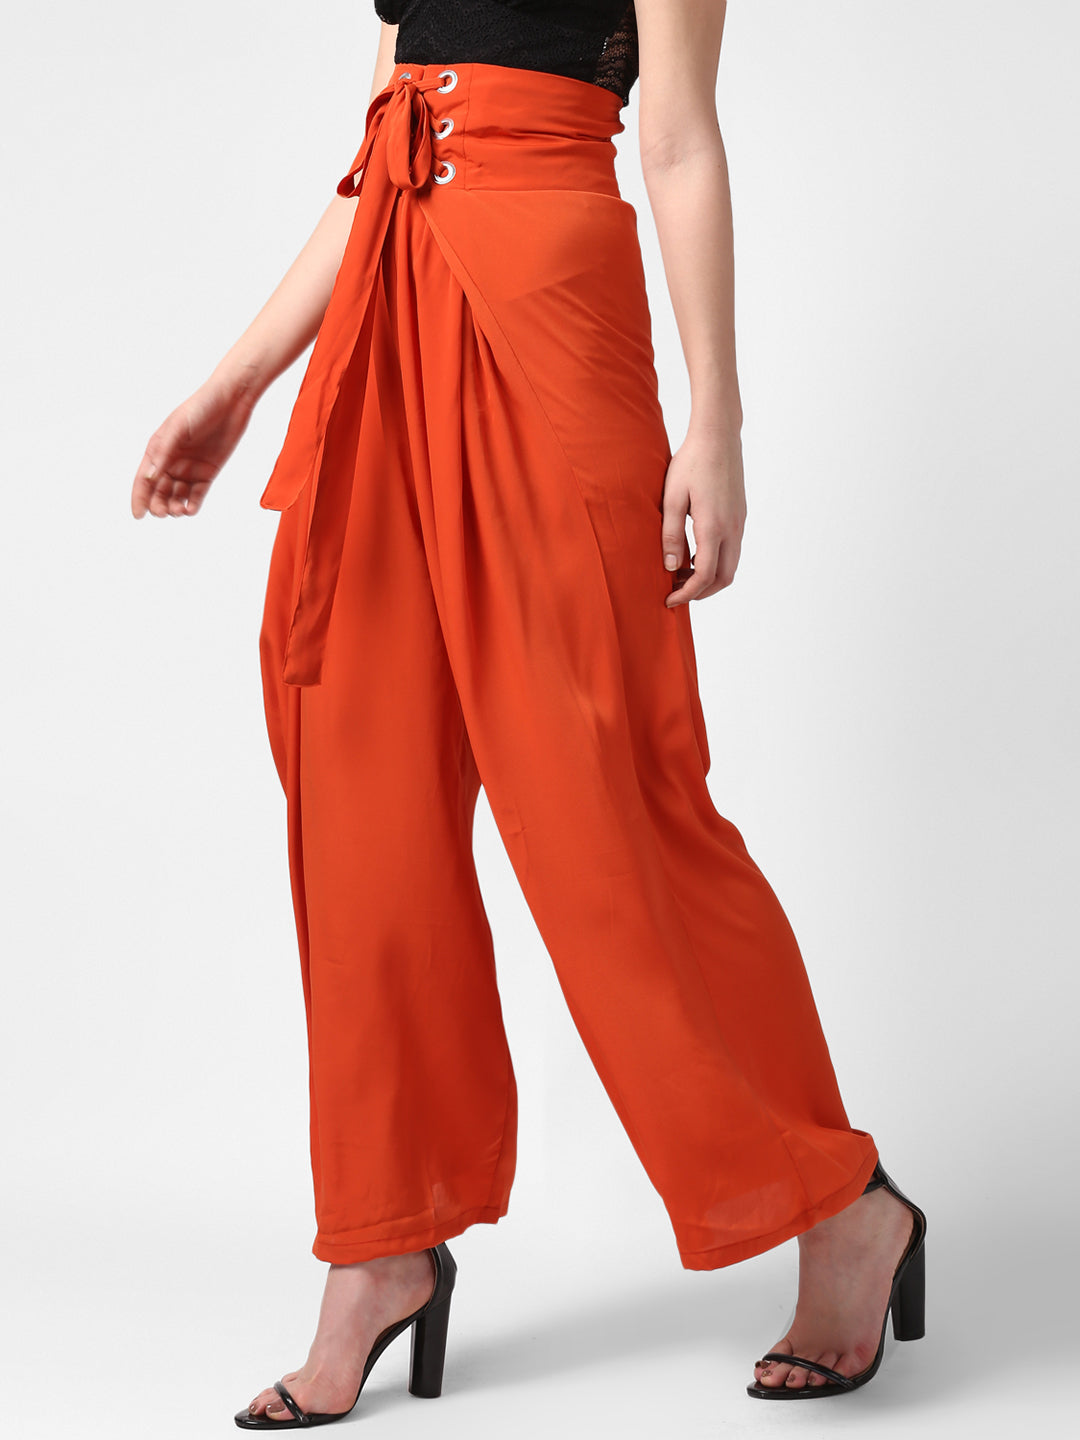 Women's Orange Polyester High Waisted Palazzo with front Rivets and Back Elastic